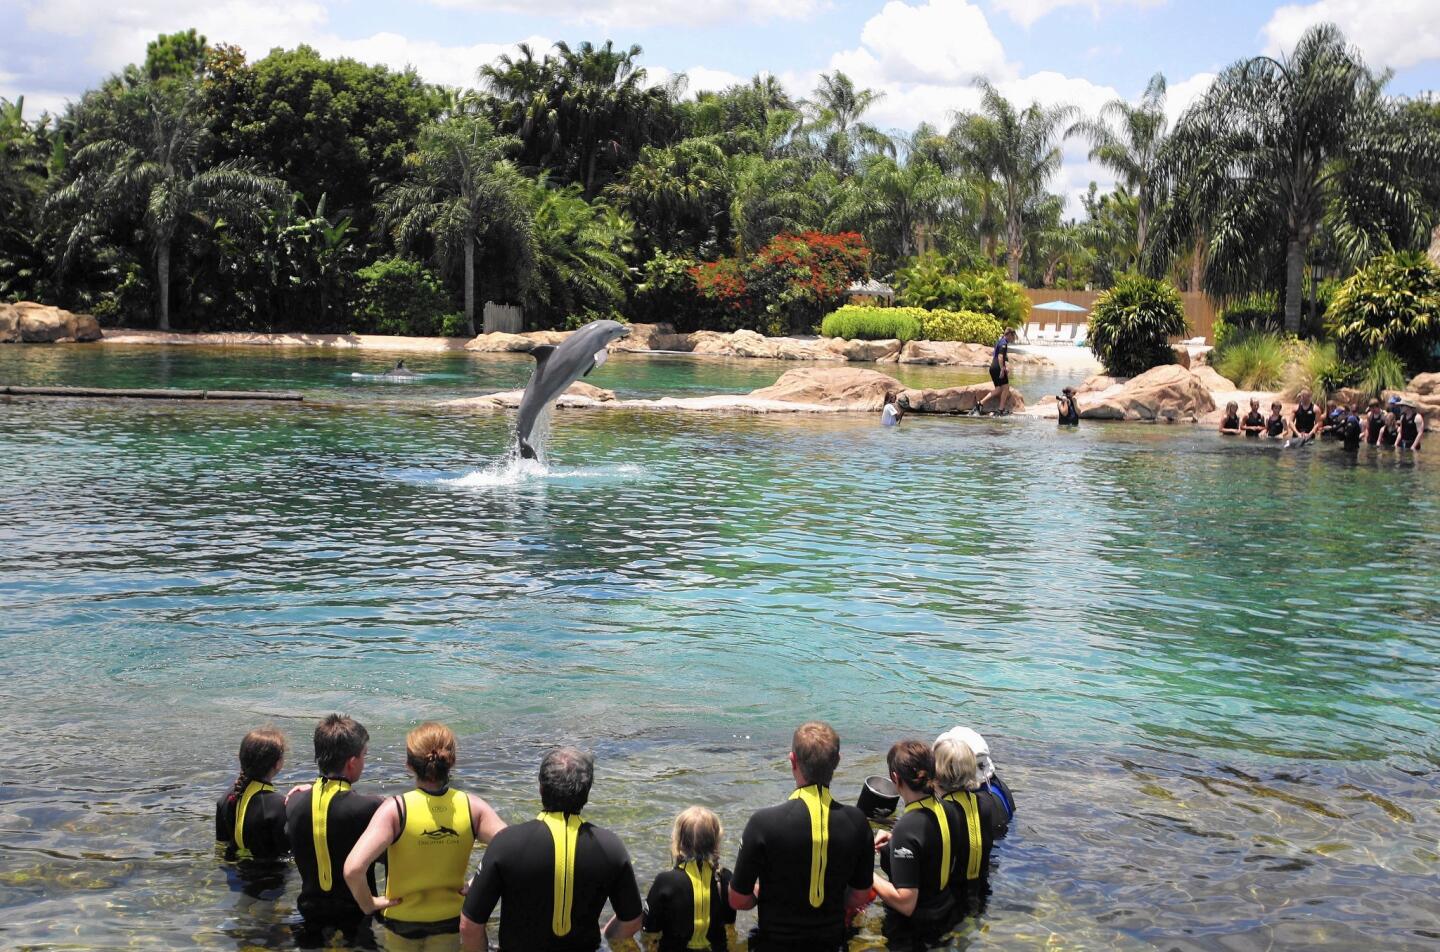 Patrons interact with dolphins at Discovery Cove in this 2011 file photo.